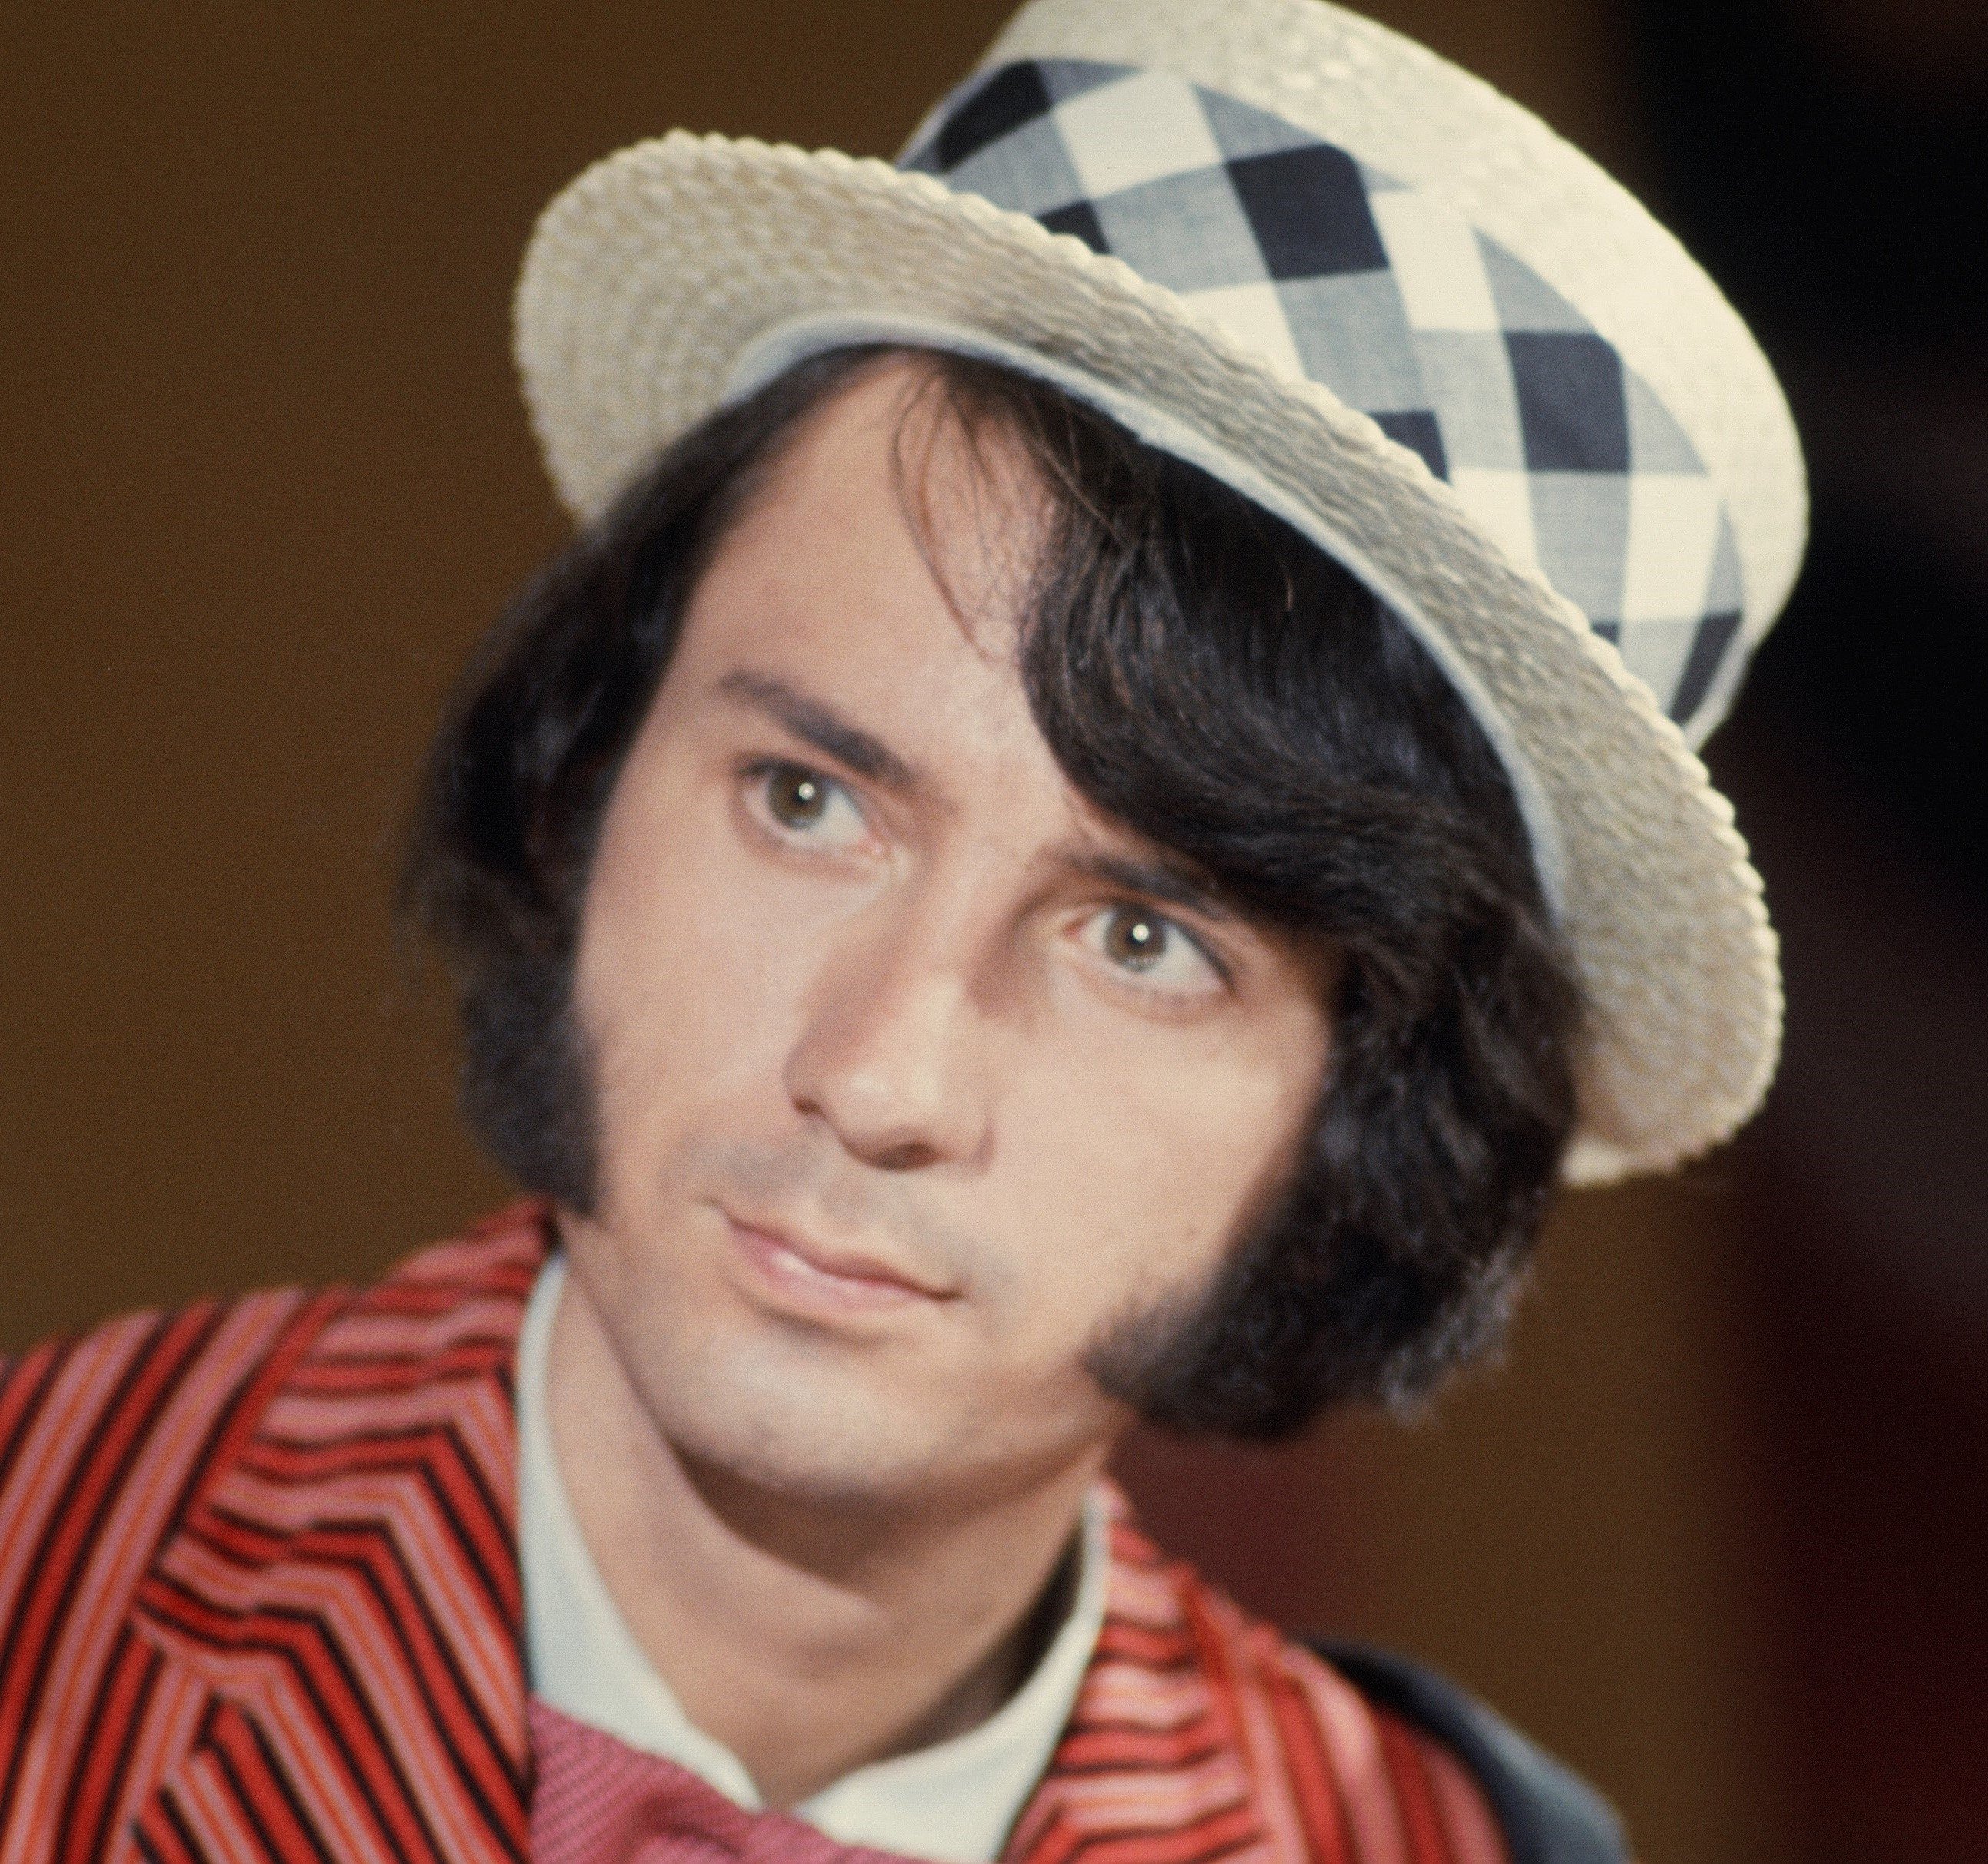 The Monkees' Mike Nesmith wearing a hat